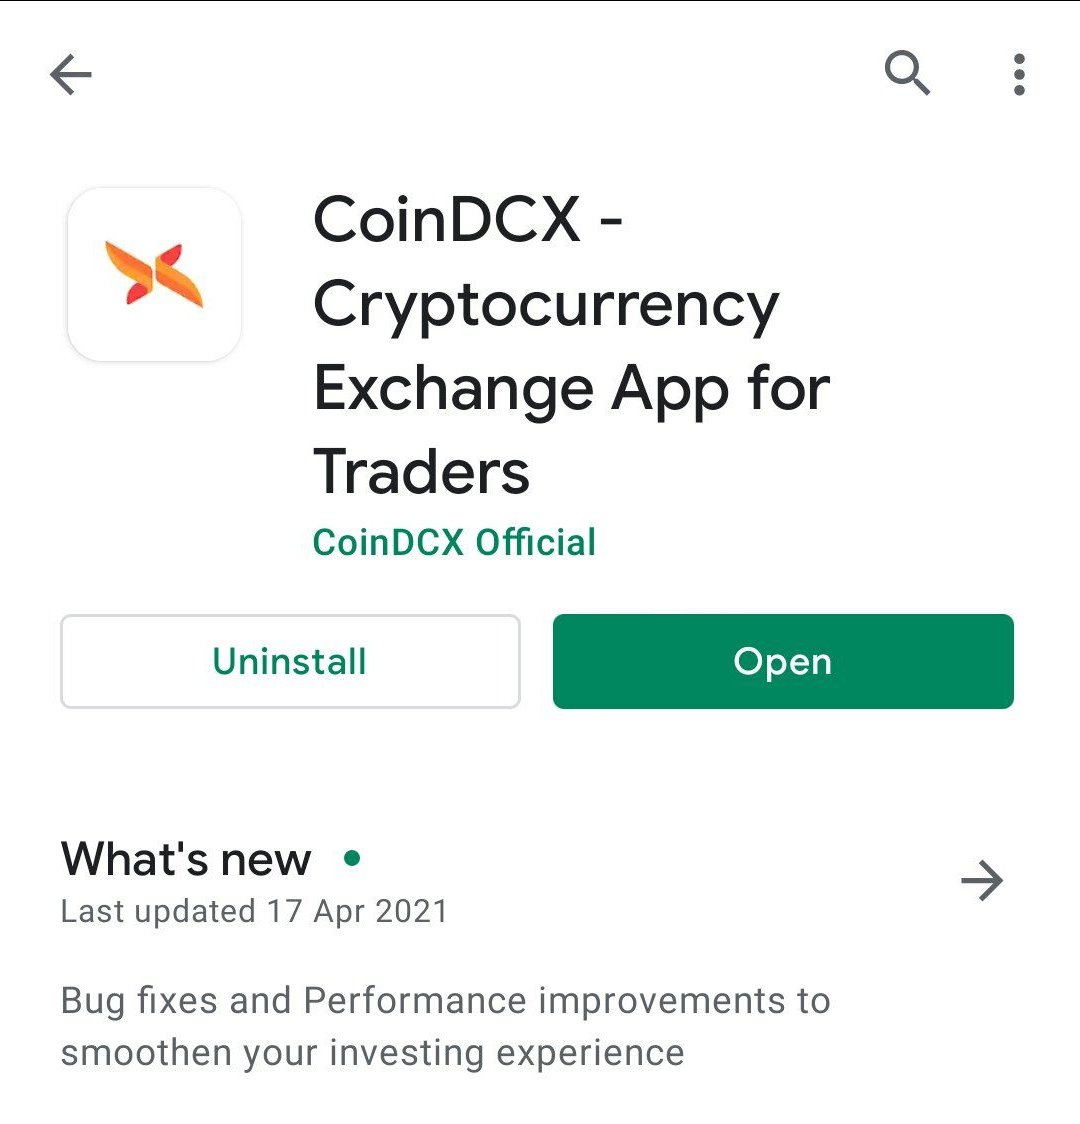 Download the CoinDCX app on your phone and launch it.